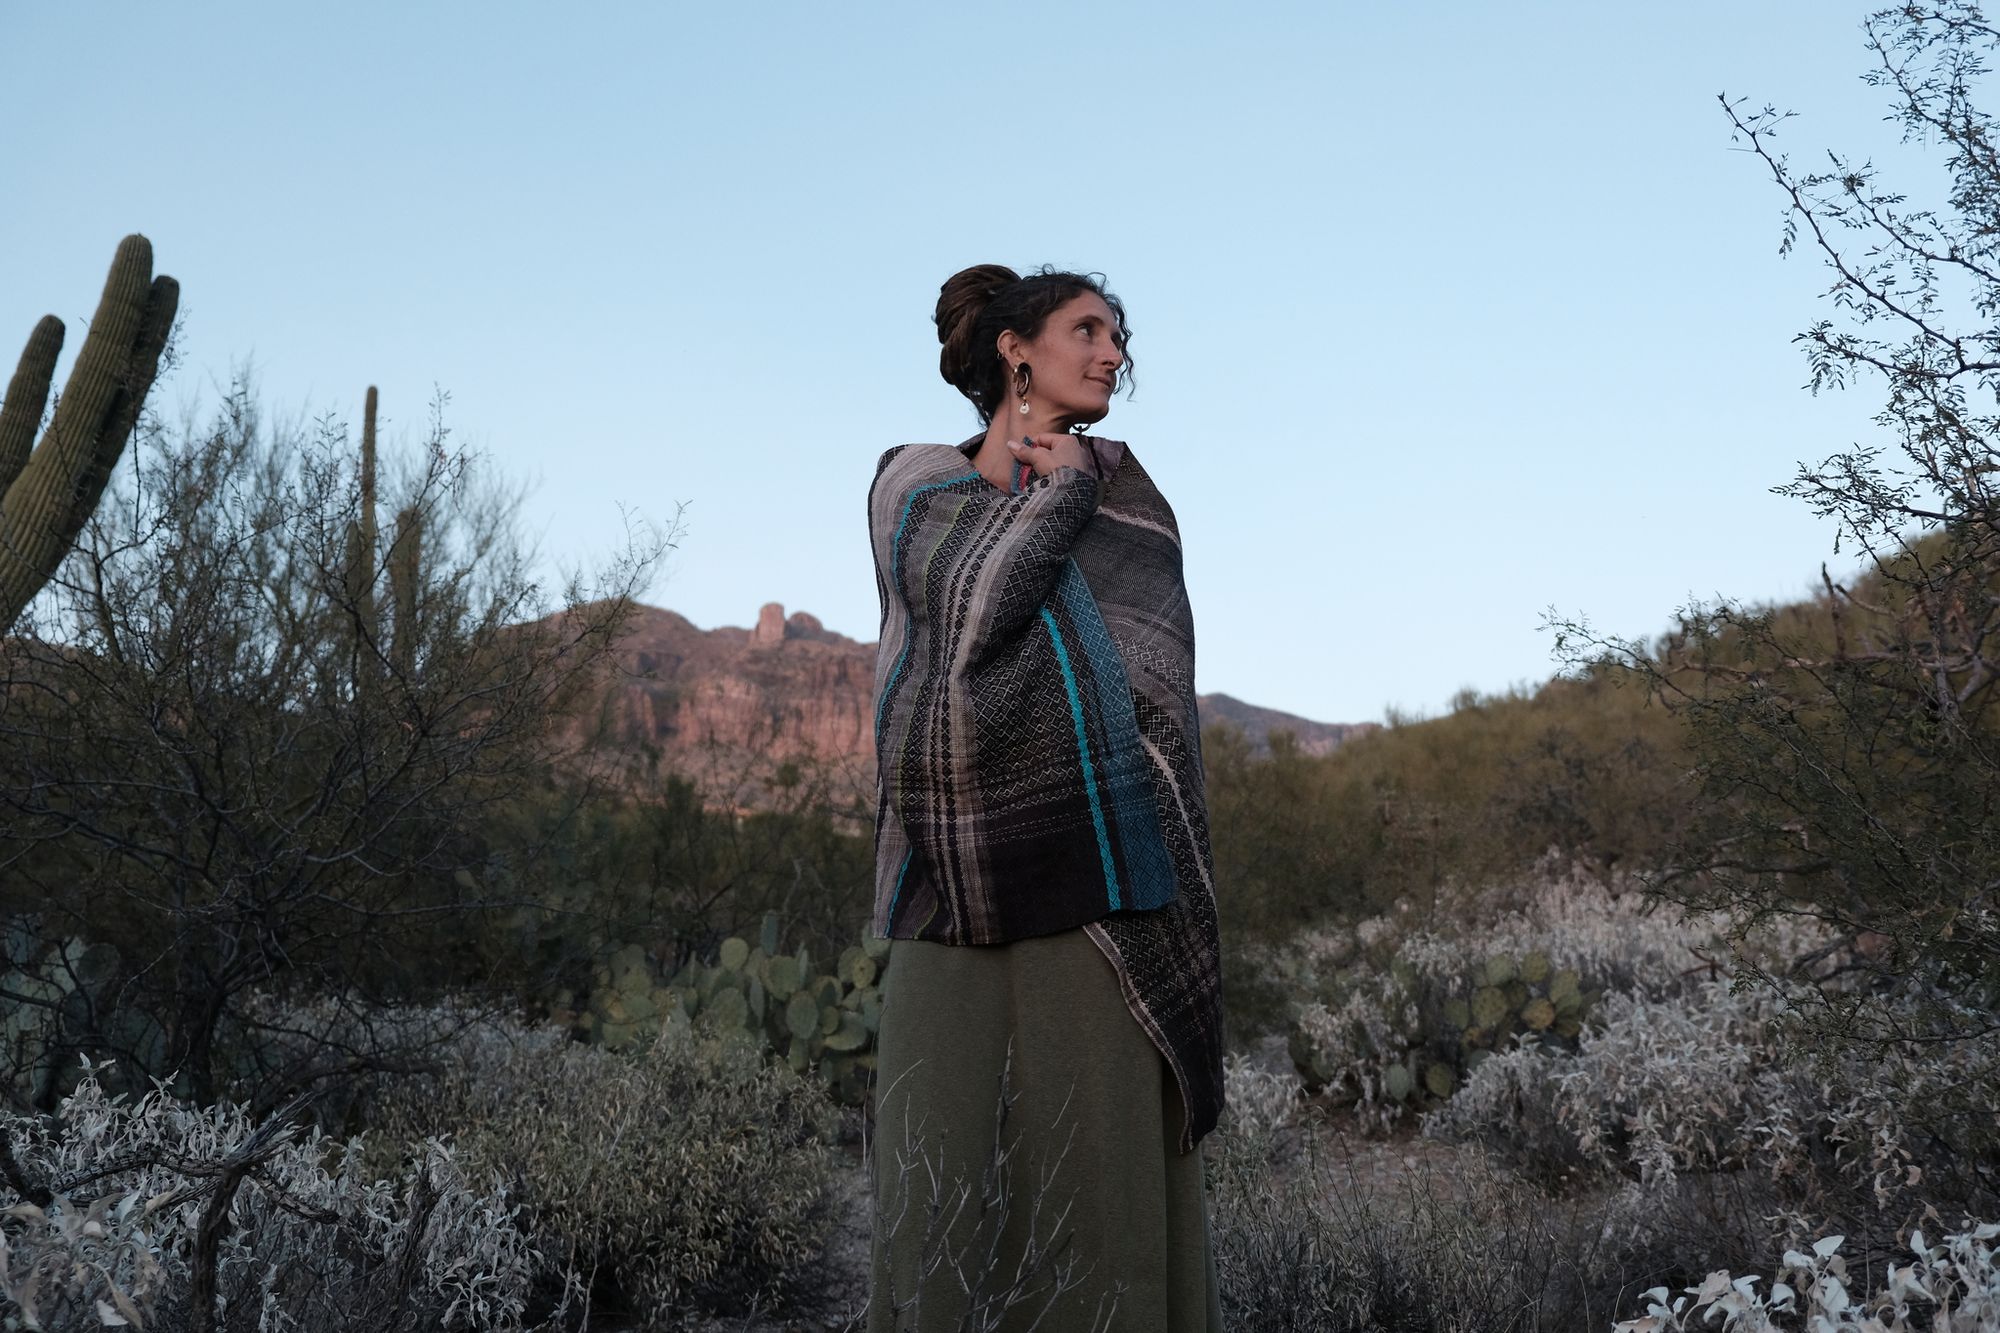 Woman wearing a handwoven black, pink, blue and lavender shawl with a crescent moon on it, standing in a desert landscape